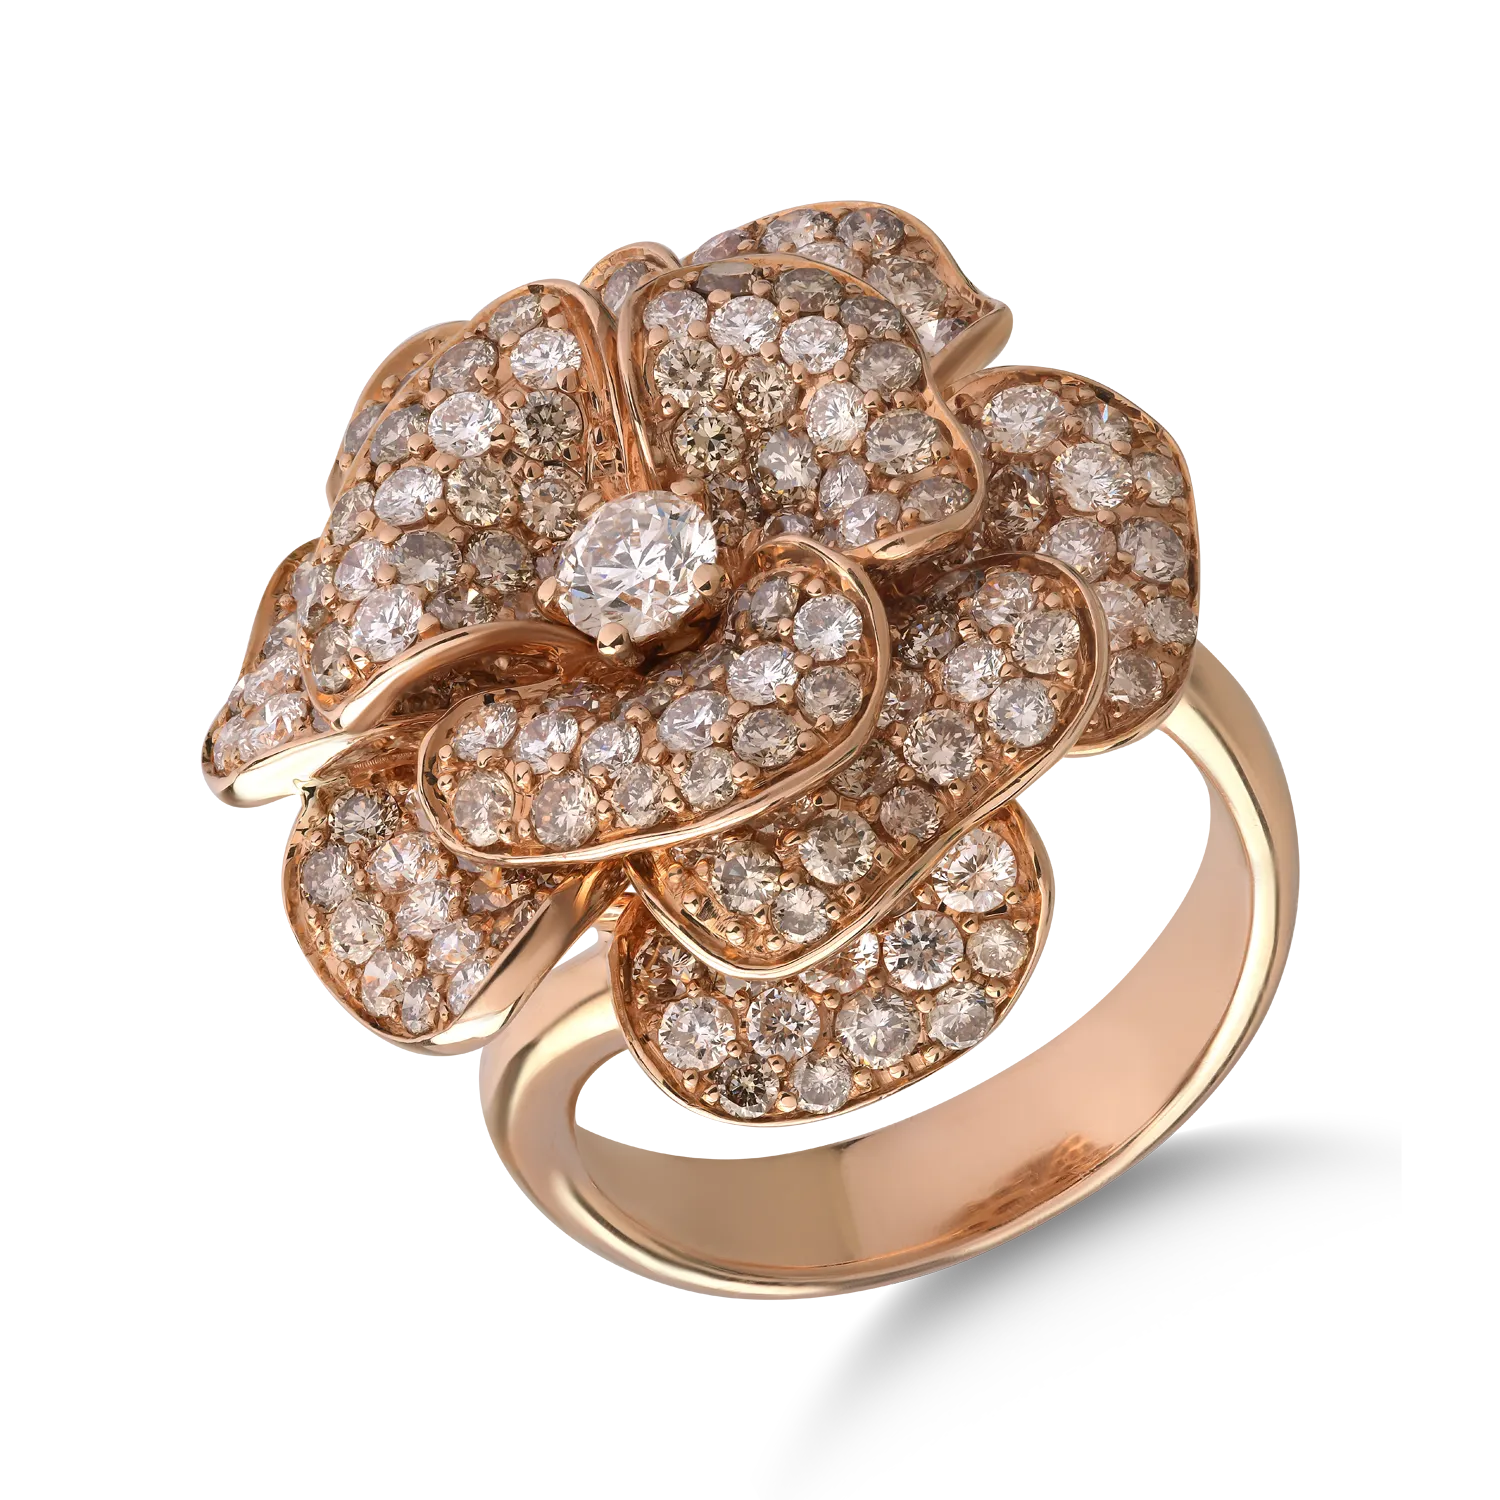 18K rose gold ring with 2.85ct brown diamonds and 1.5ct clear diamonds